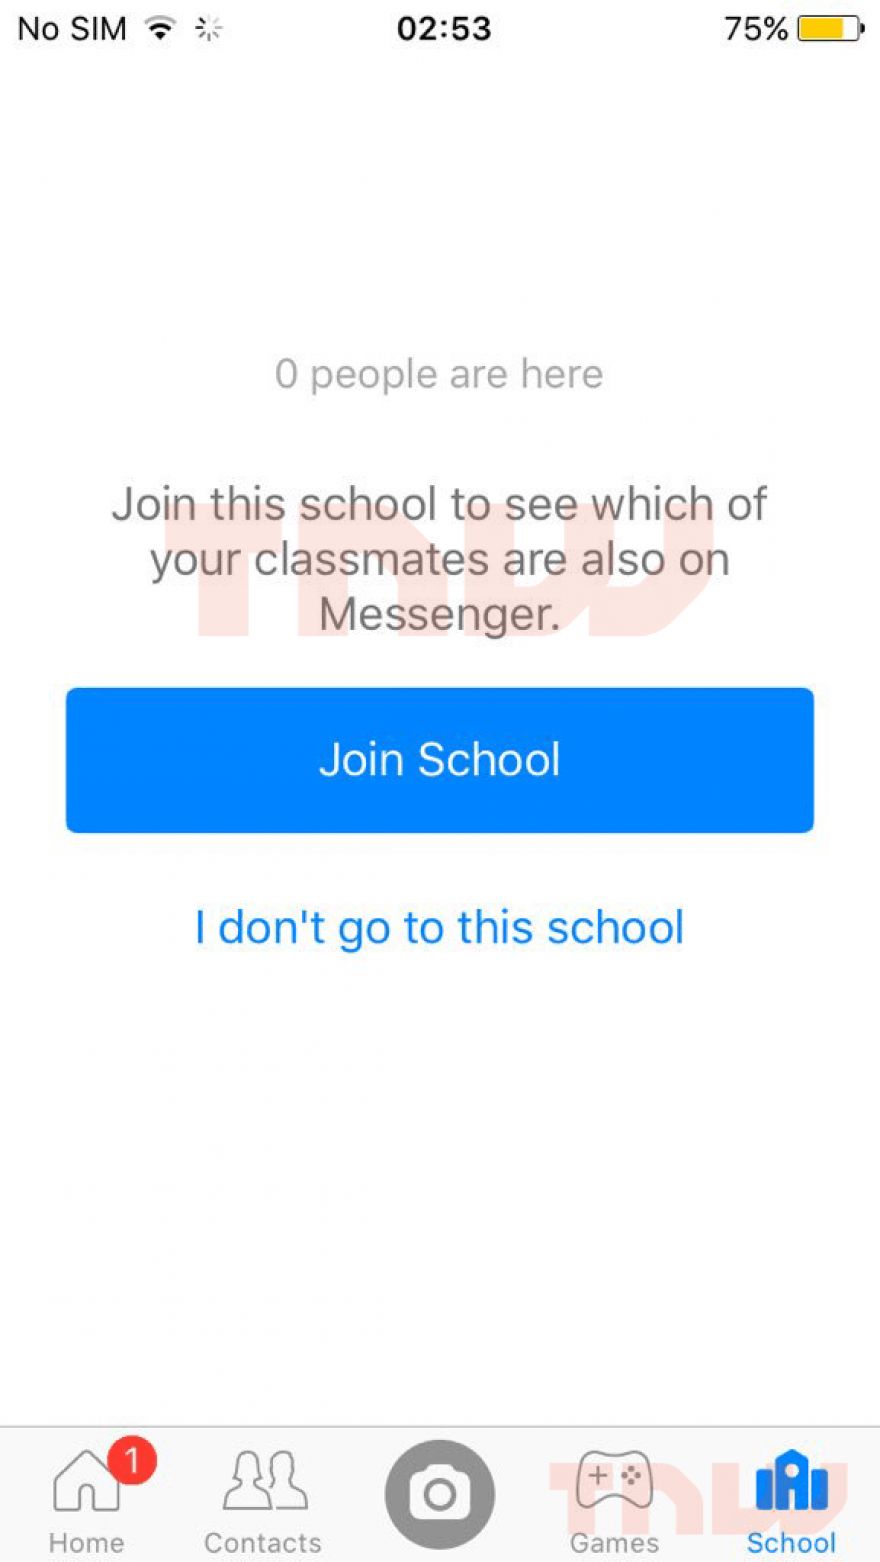 Facebook trials ‘High School Networks’ for Messenger – what could go wrong there?